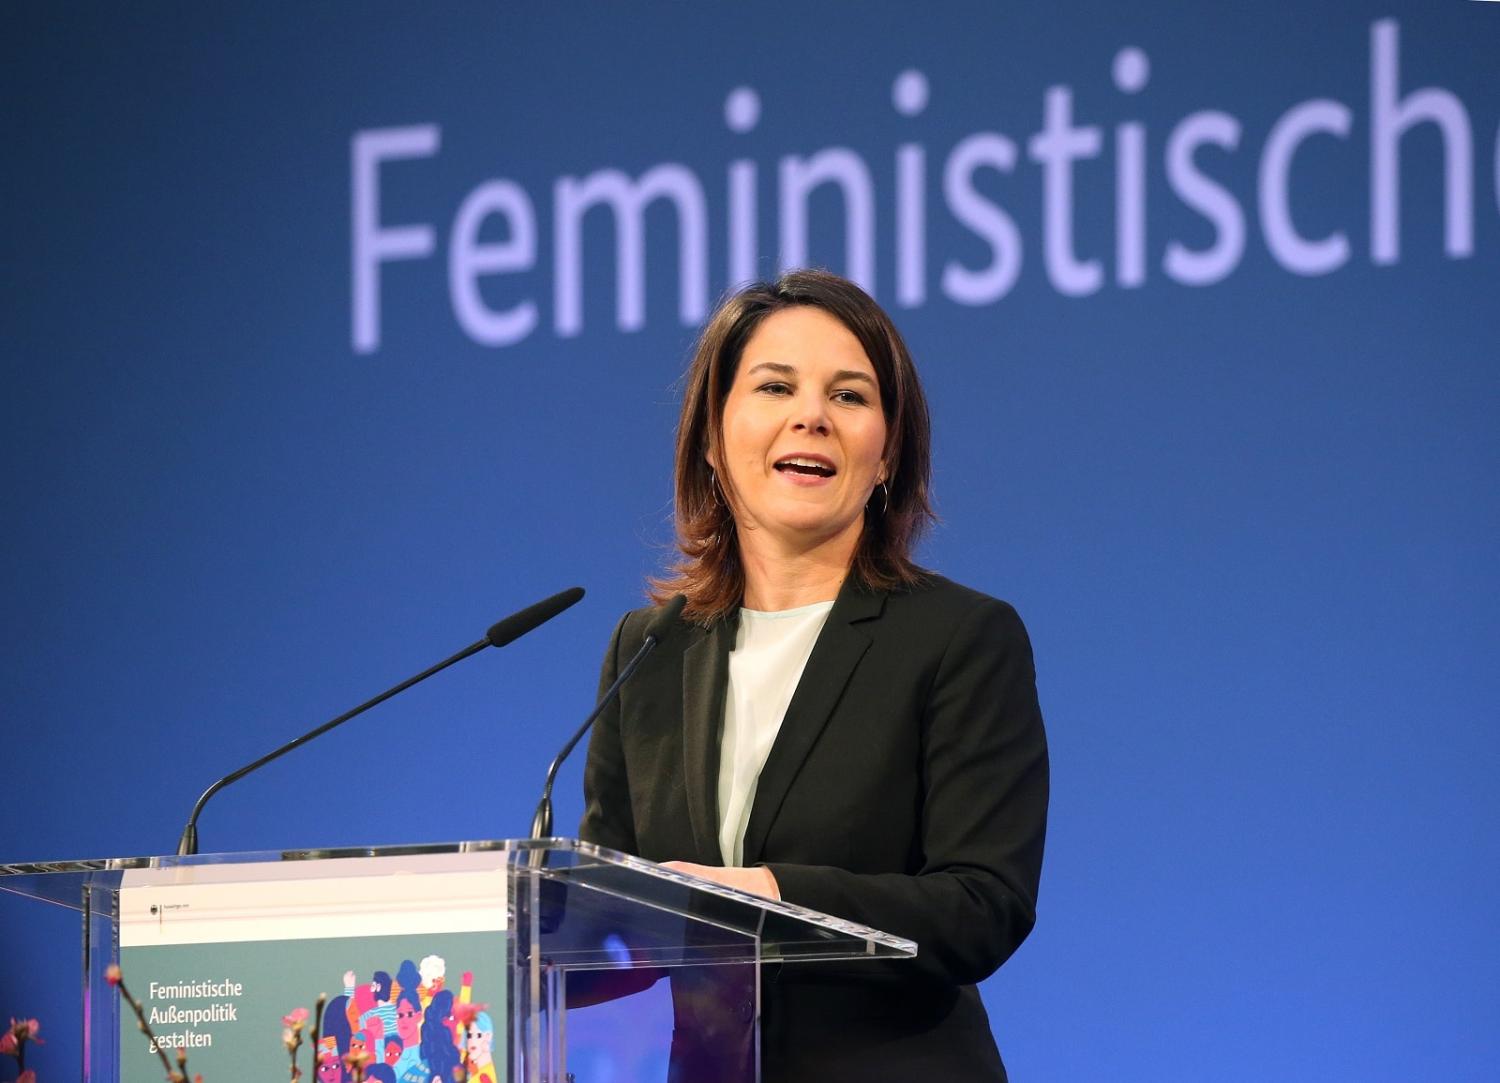 German Foreign Minister Annalena Baerbock gives a speech at the presentation of the Guidelines on Feminist Foreign Policy in the Weltsaal of the Federal Foreign Office, Berlin, 1 March 2023 (Wolfgang Kumm/picture alliance via Getty Images)